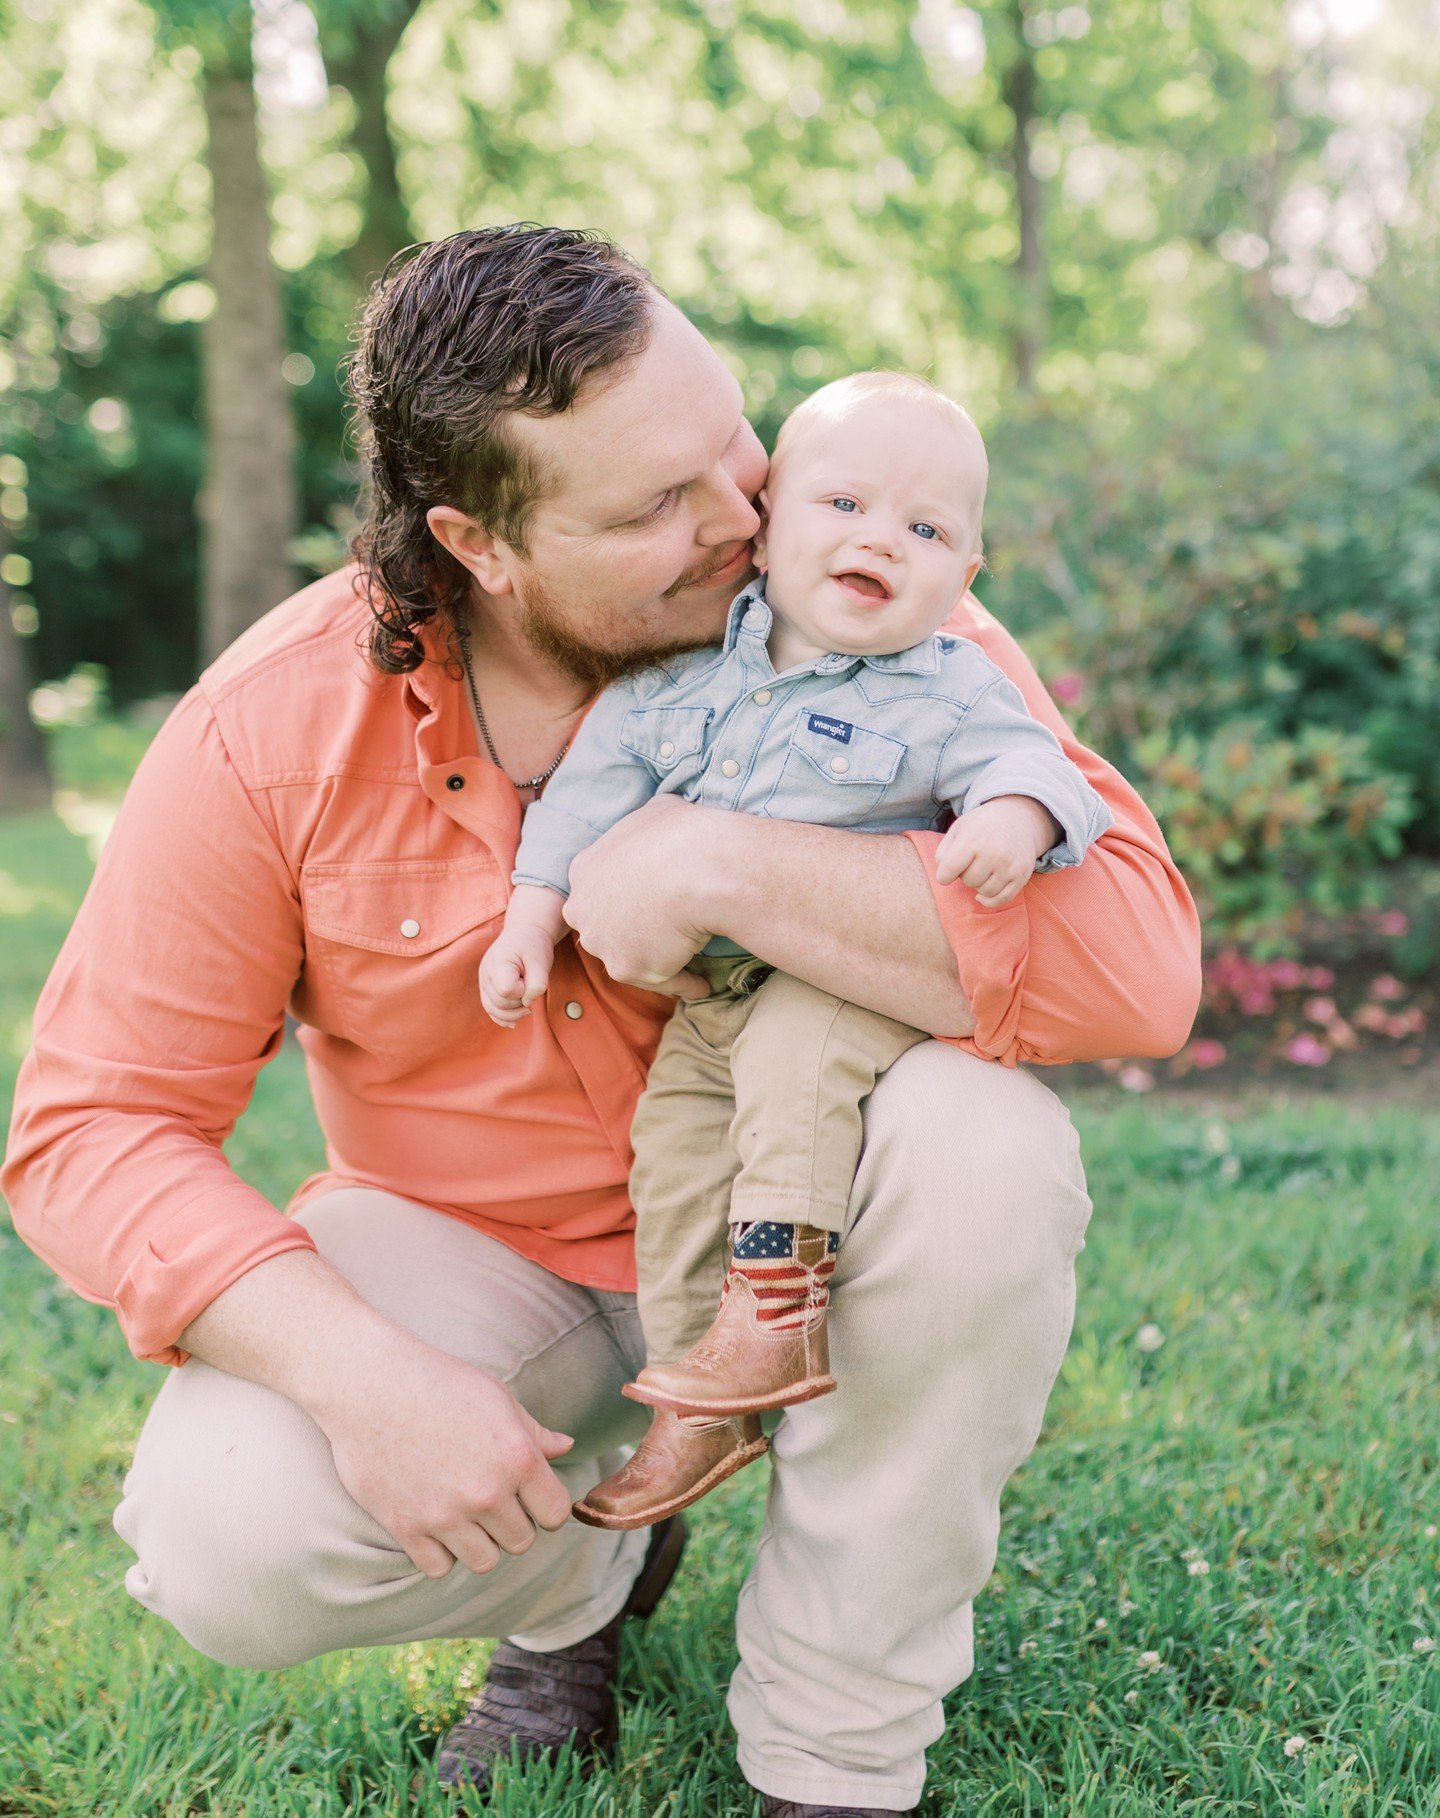 Calling all DADS! I am planning a micro mini session in anticipation for Father's Day! We all know guys want to keep their photo sessions short and sweet! This would be a great opportunity to be fun and creative for all the dads in our lives. Bring y